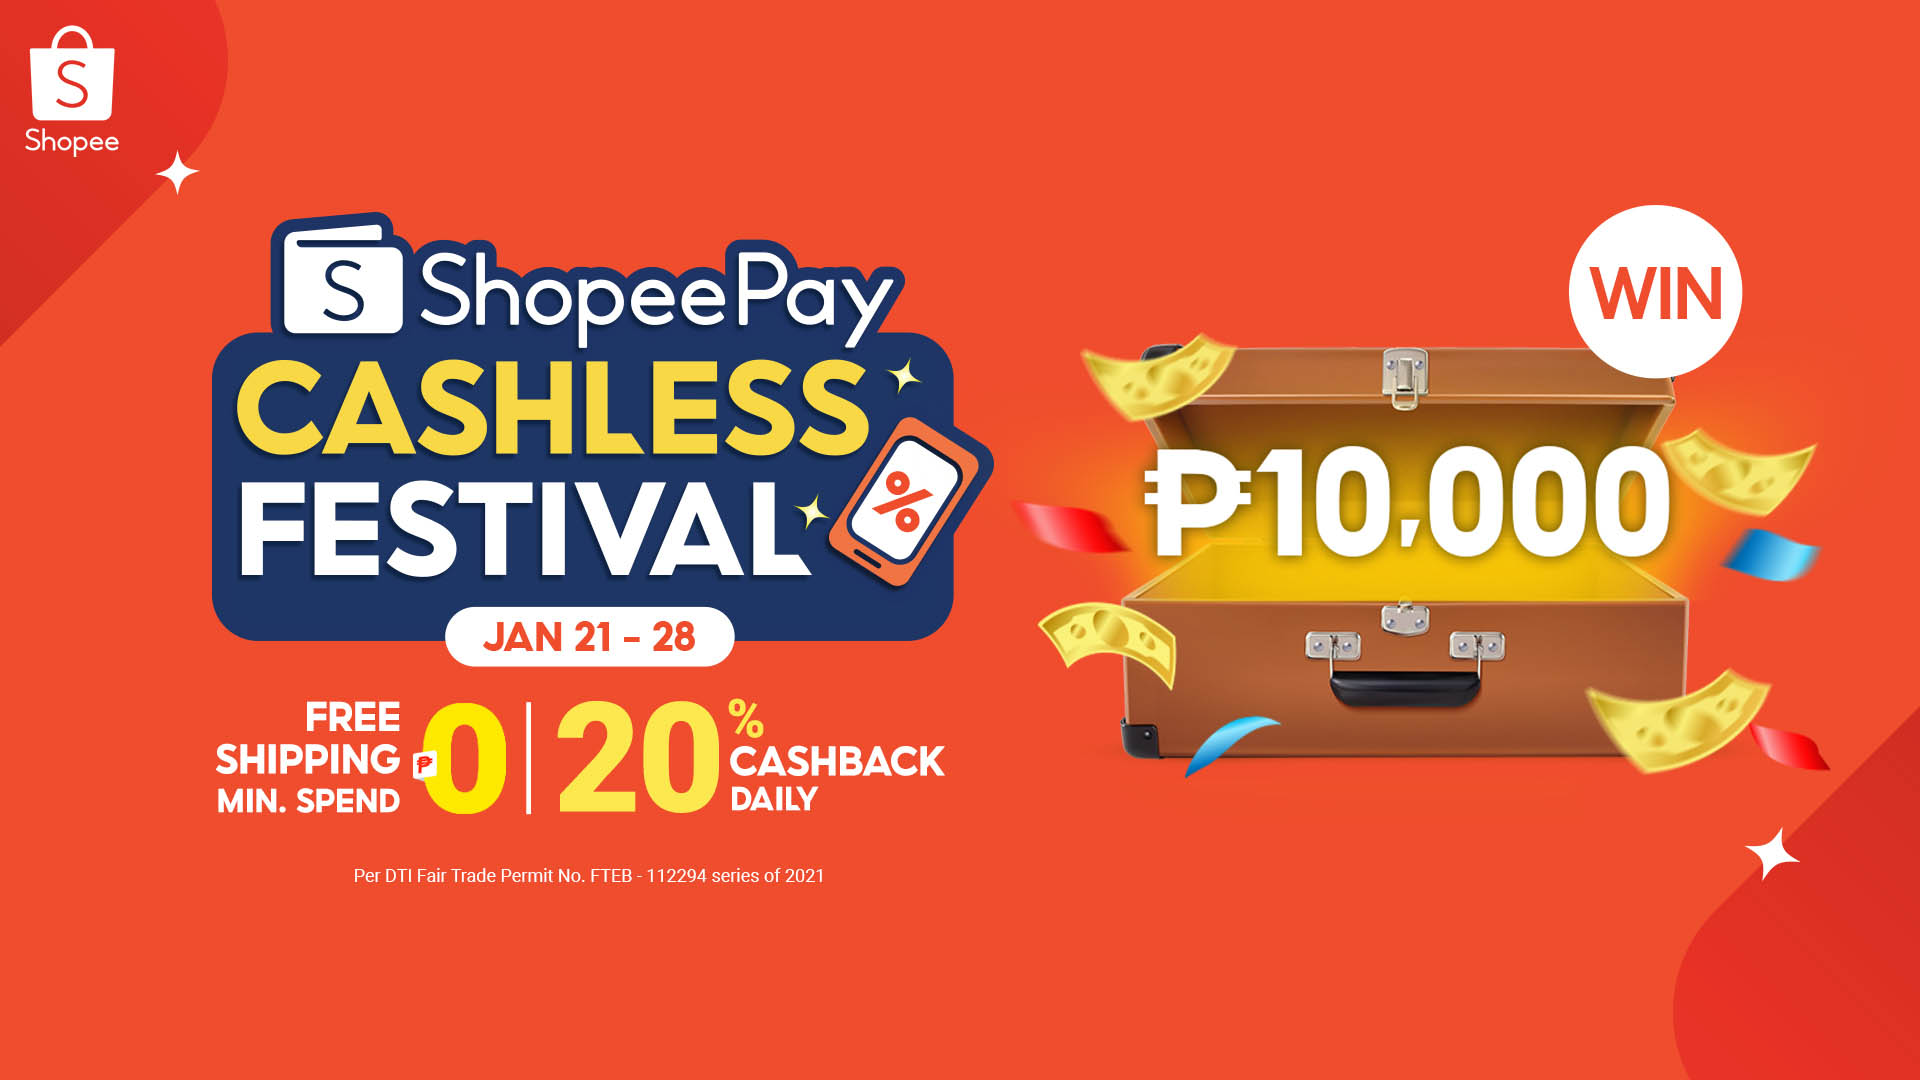 Top Up and Transfer for a Chance to Win PHP10,000 at the ShopeePay Cashless Festival